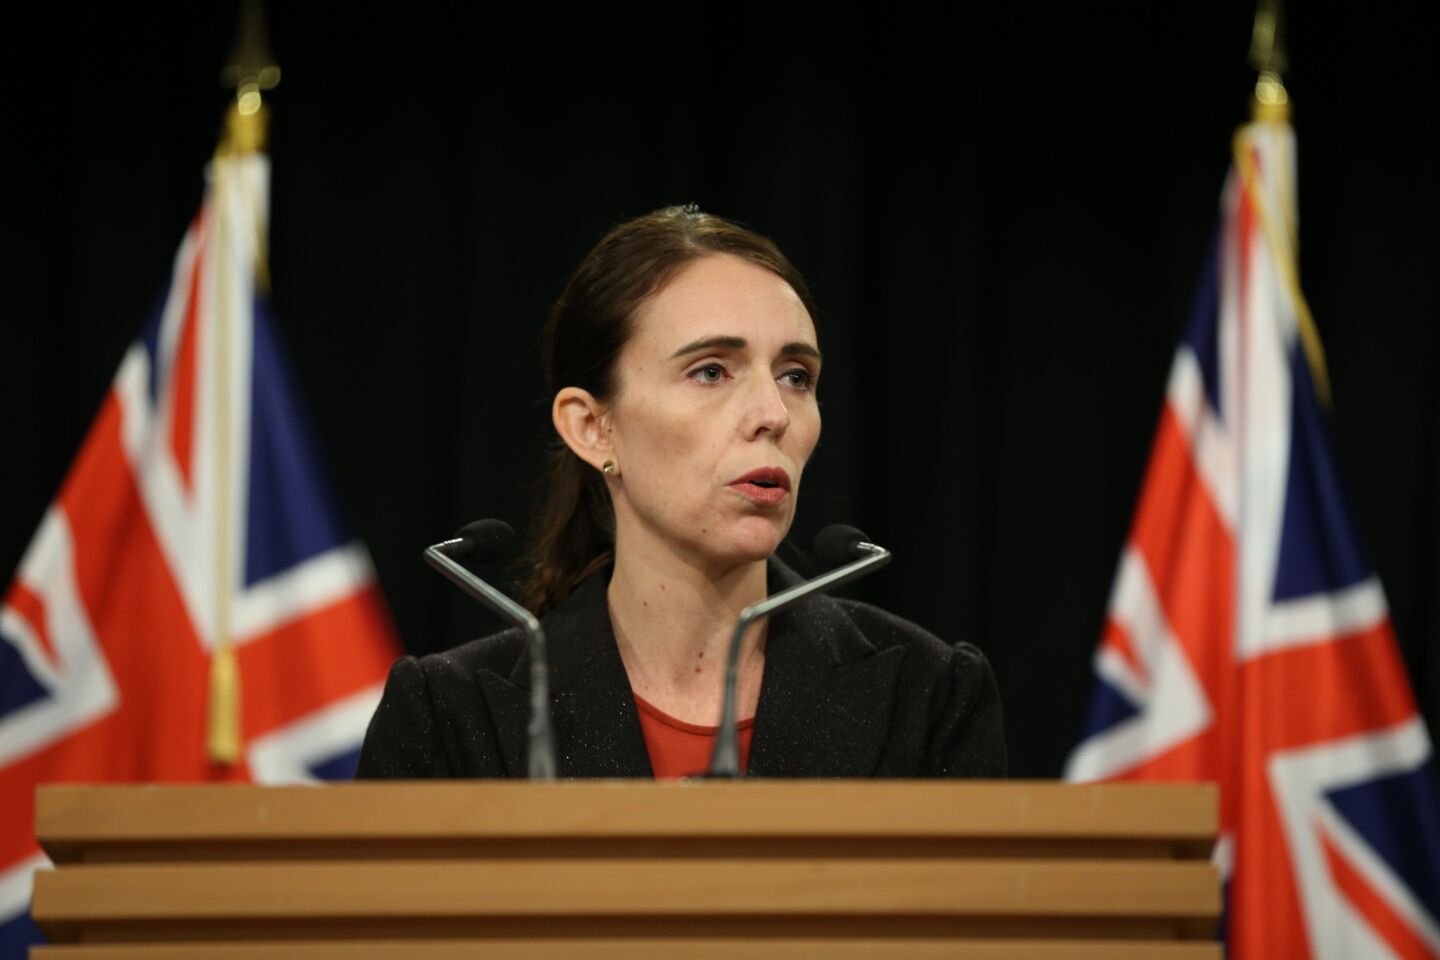 New Zealand Bans All Assault Weapons In Response To Mosque Attacks Los Angeles Times 6620